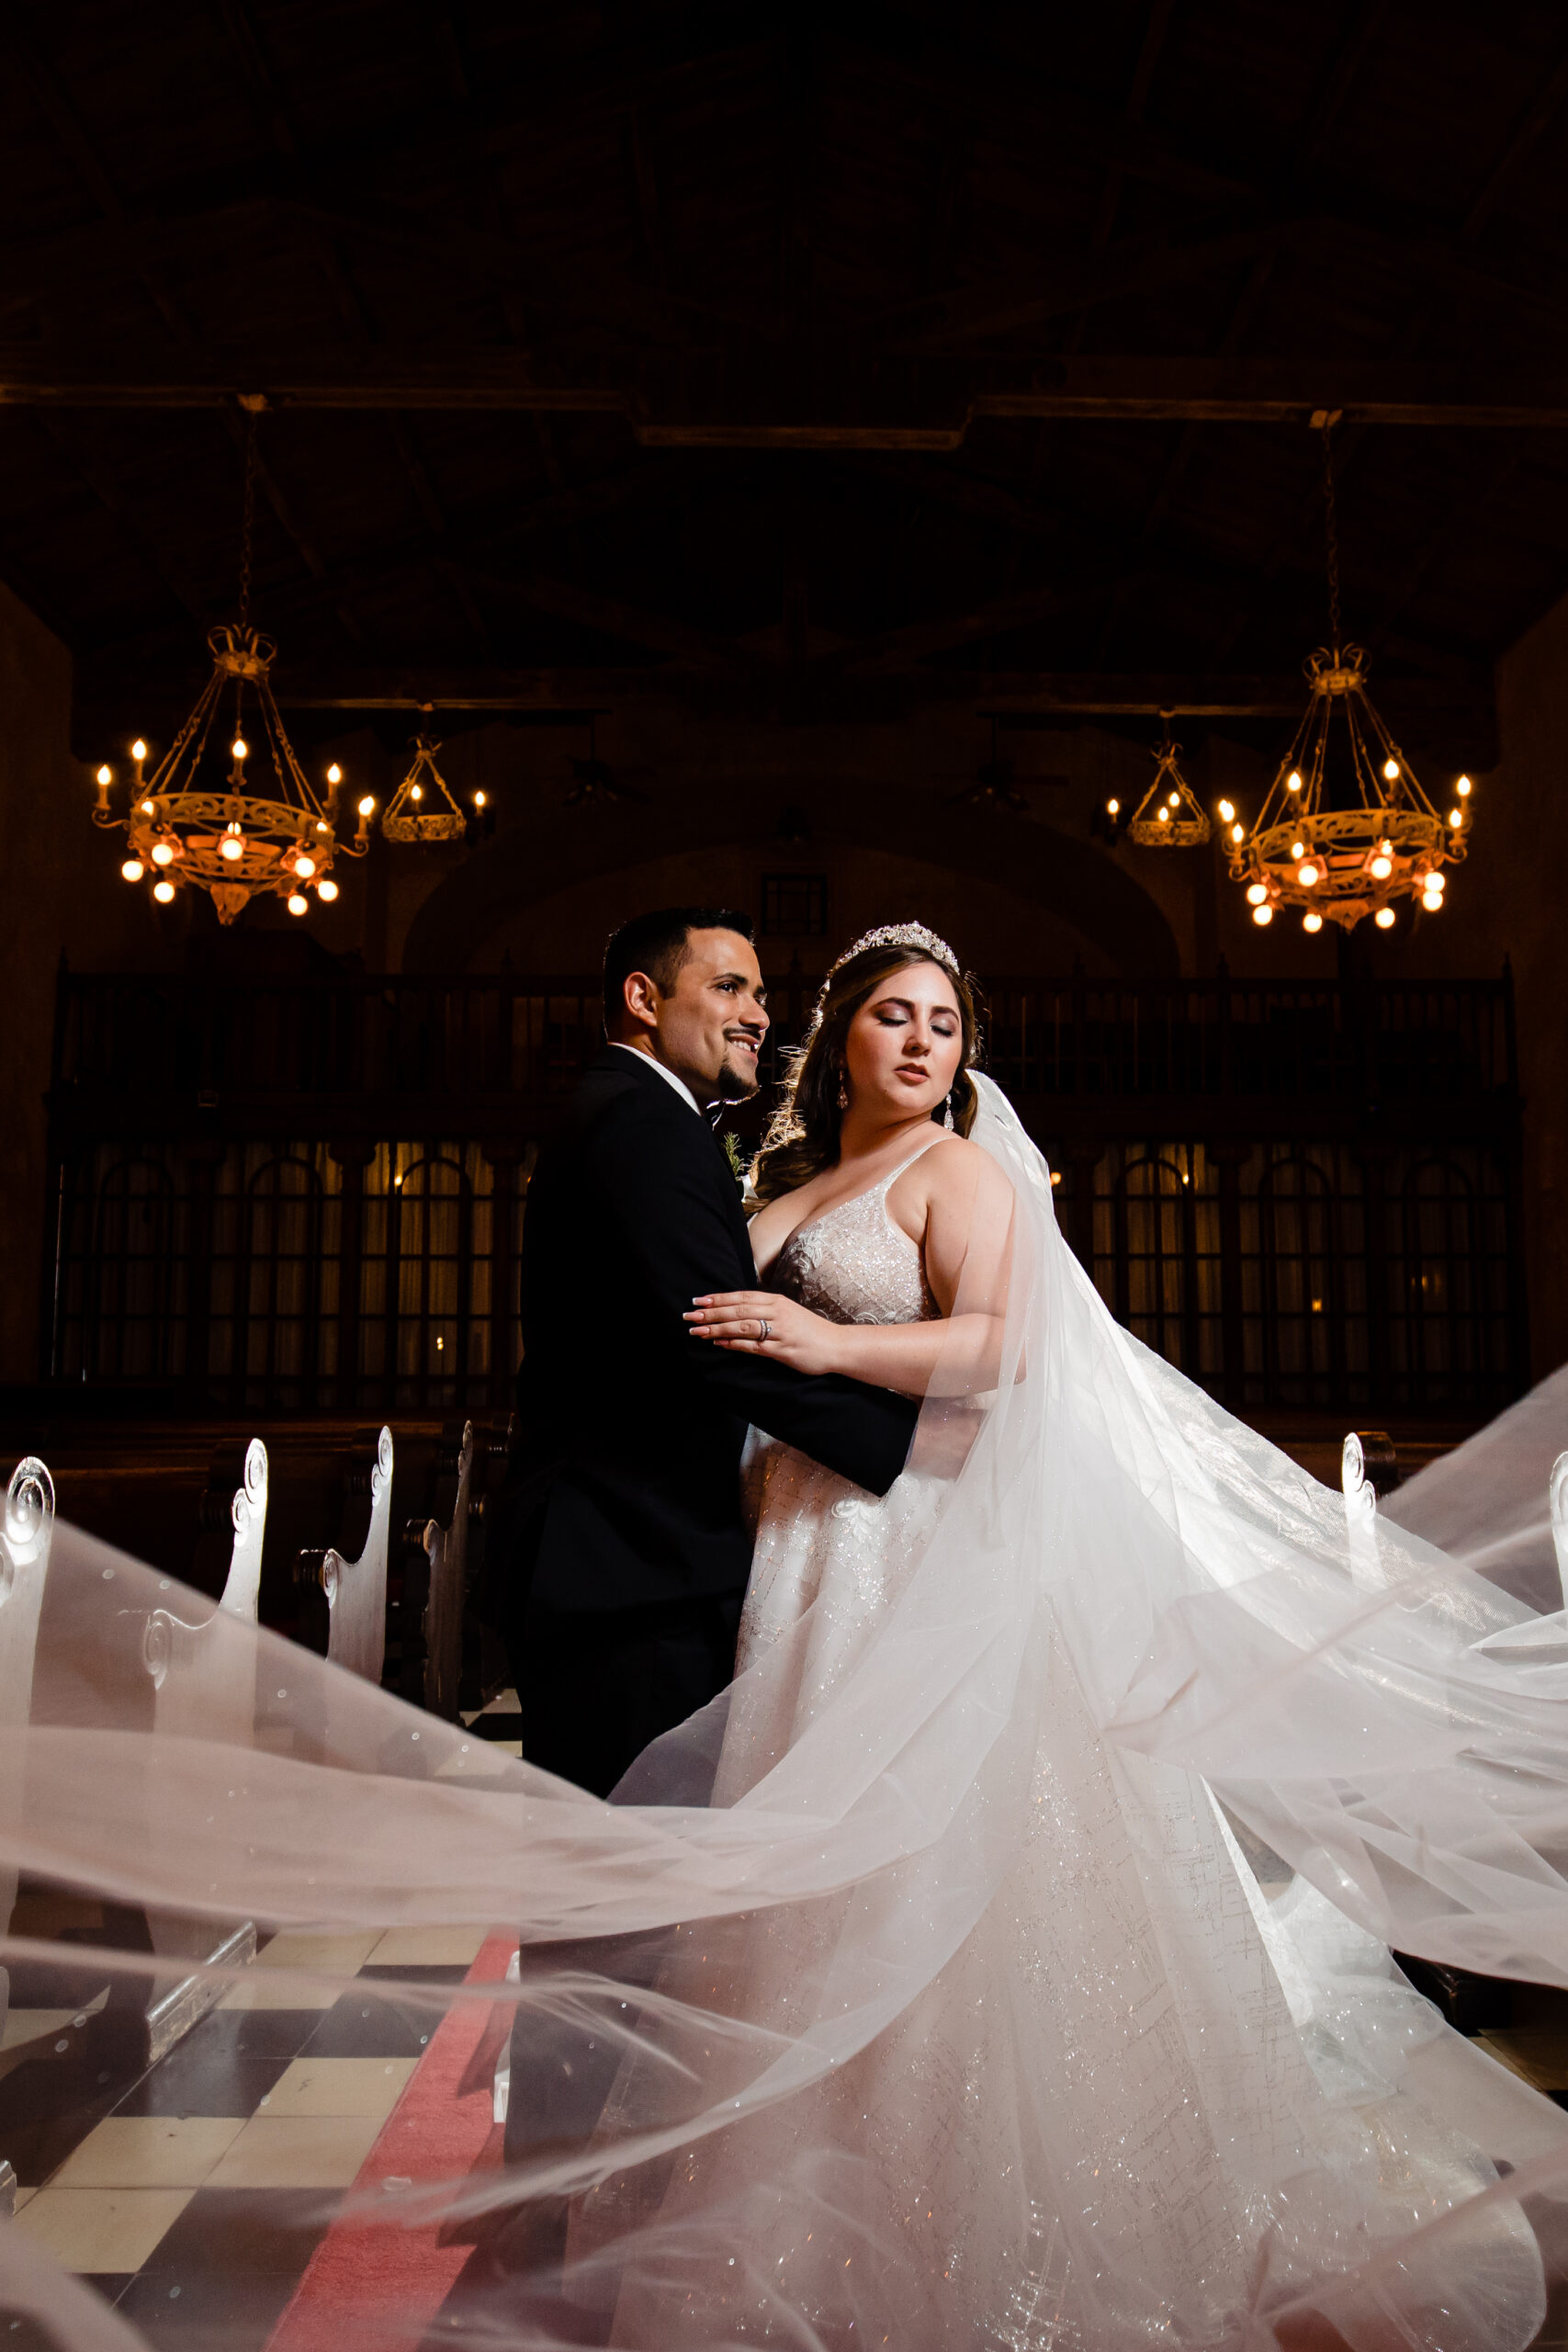 An elegant wedding portrait of a couple inside a Miami church, where the bride's veil gracefully floats, creating a moment of timeless beauty. This enchanting scene was masterfully captured by Jarot Bocanegra Photography